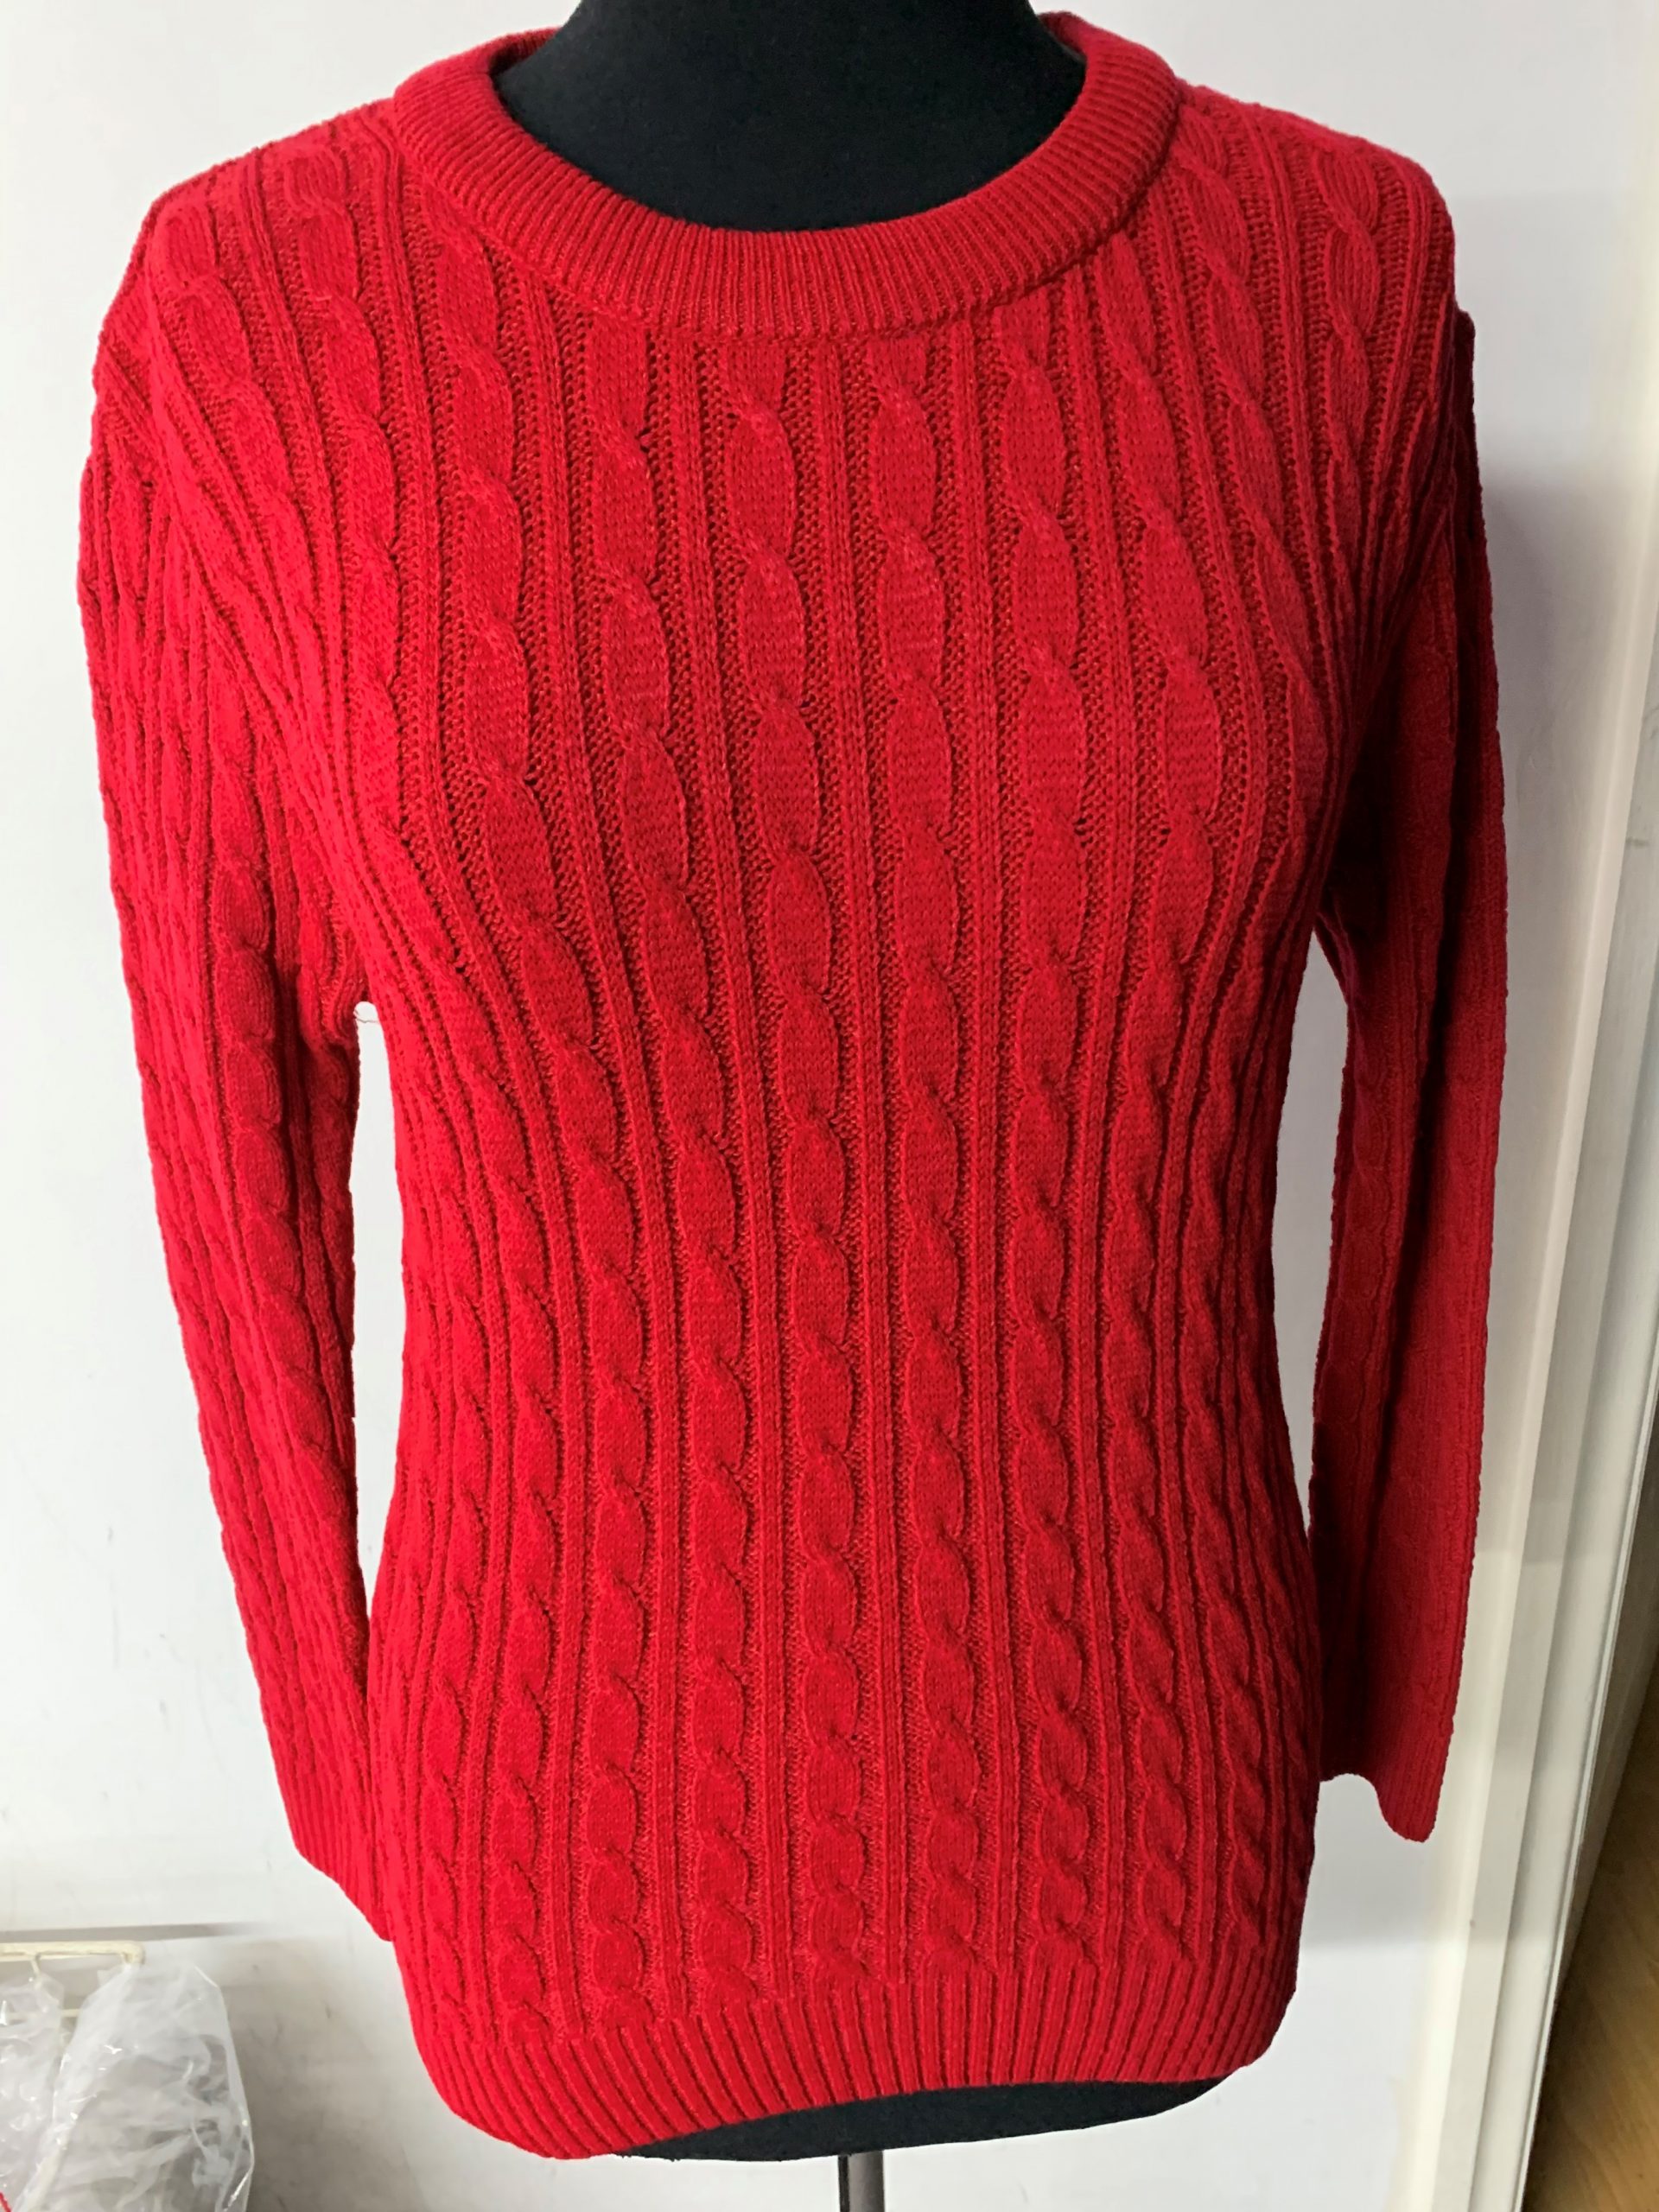 LADIES LONG SLEEVE KNITTED JUMPER WOMENS PLAIN CHUNKY CABLE KNIT ...